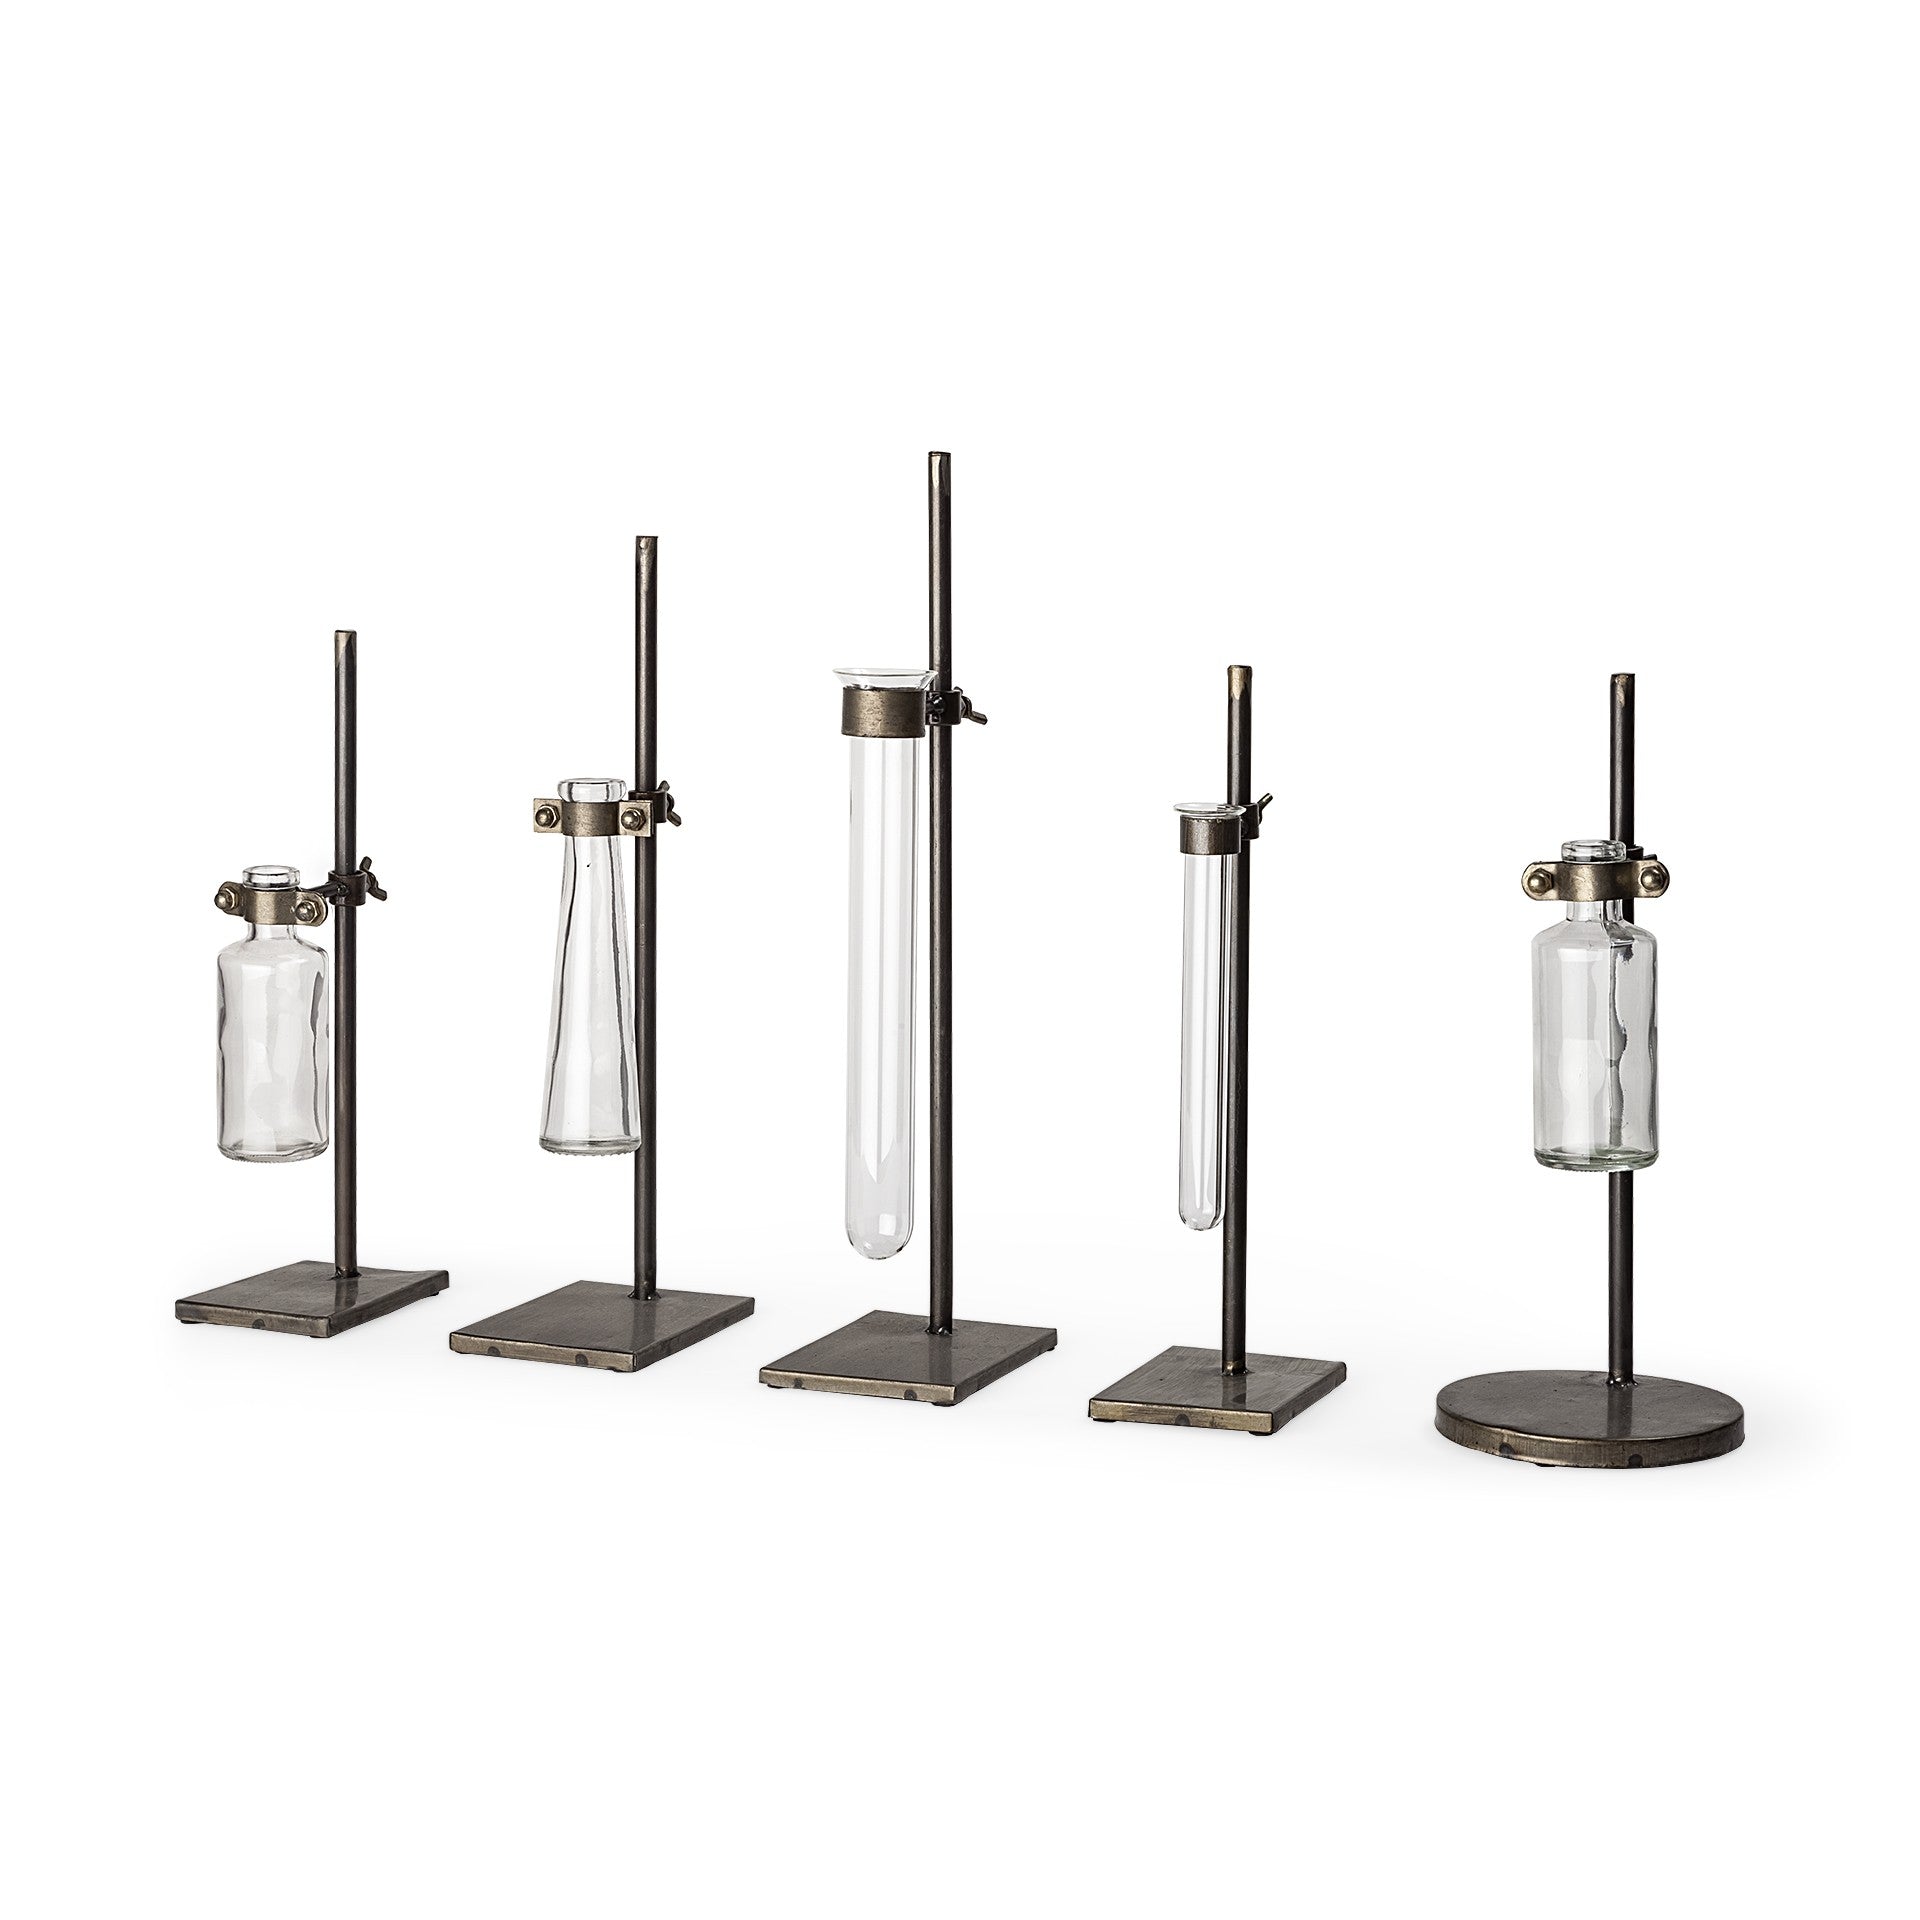 Set of Five Test Tube Vases with Metal Bases